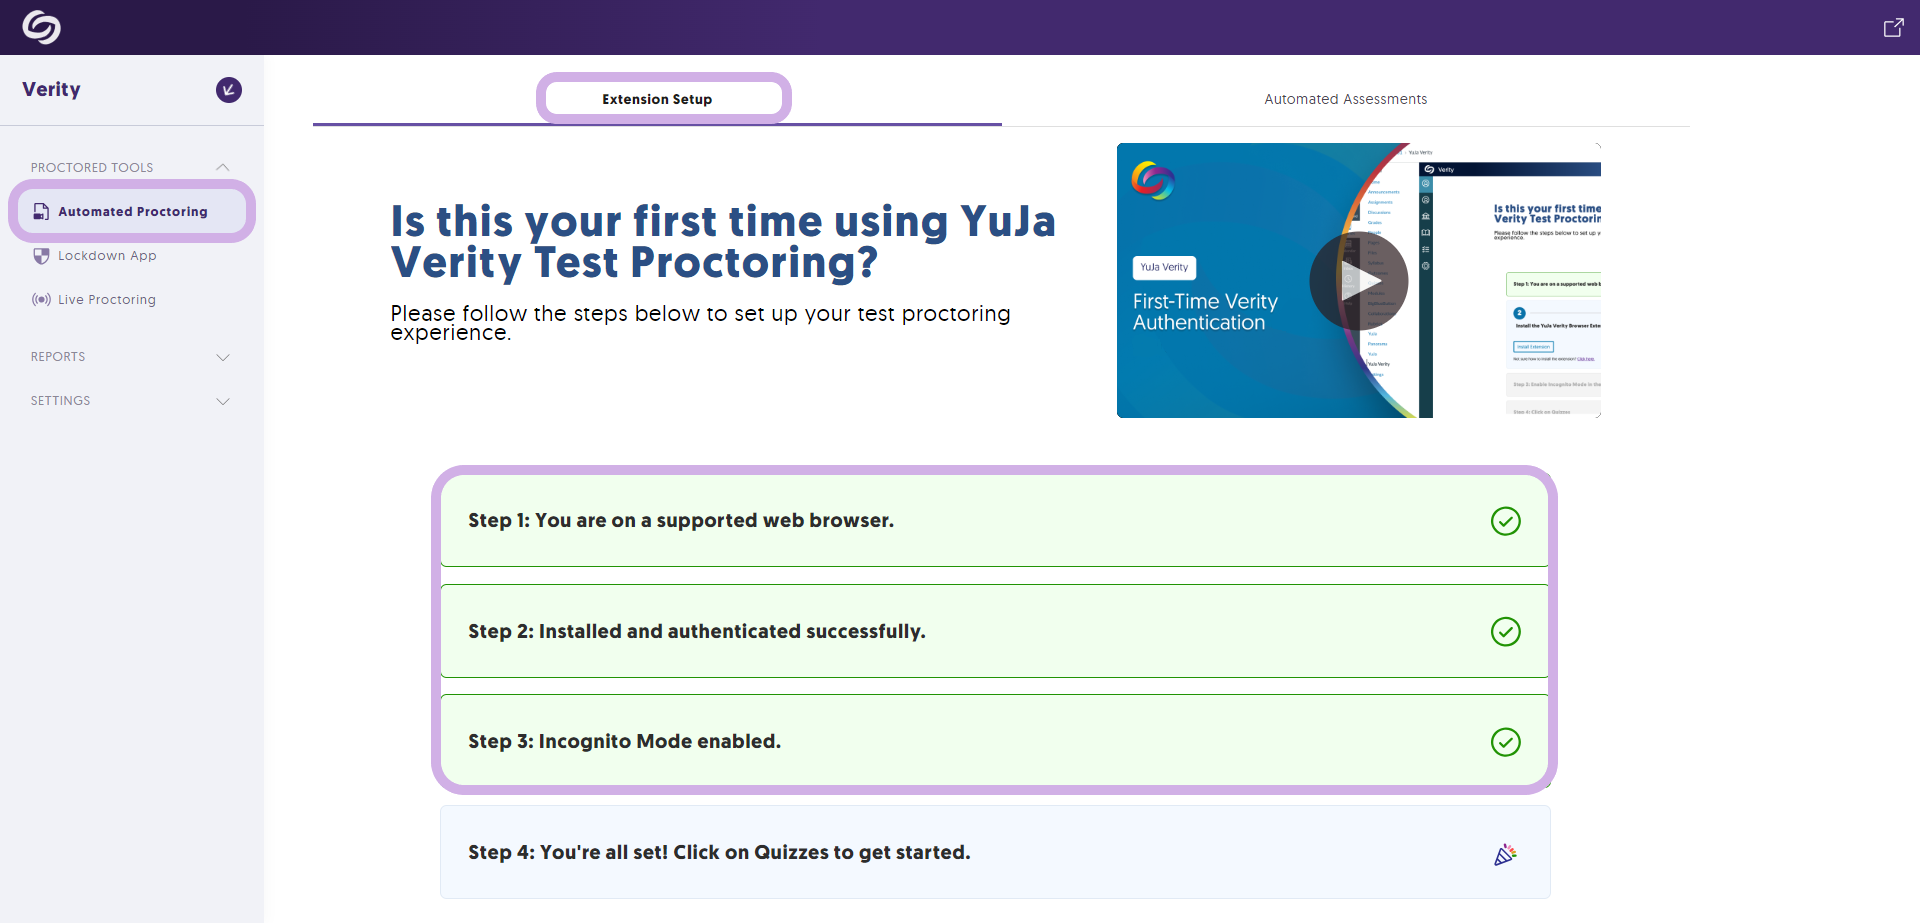 YuJa Verity is open on the Automated Proctoring page, and the Extension Setup and Automated Proctoring tabs are highlighted, along with the first 3 steps required to set up the test-proctoring experience.